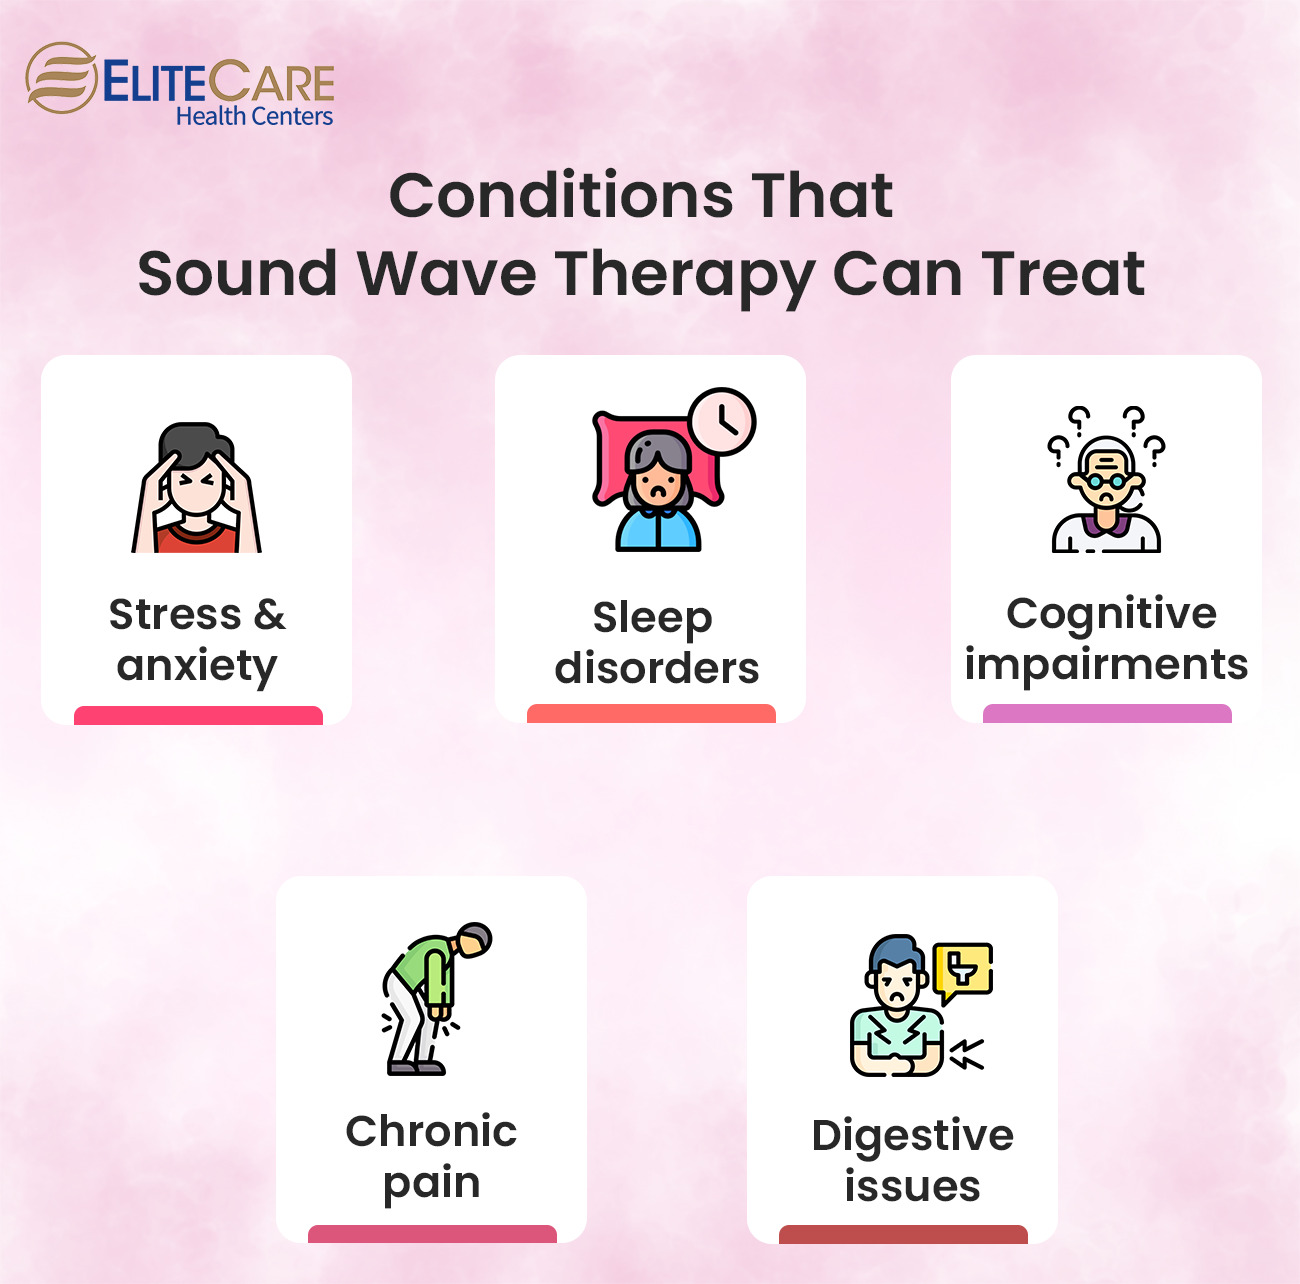 Conditions that Sound Wave Therapy Can Treat